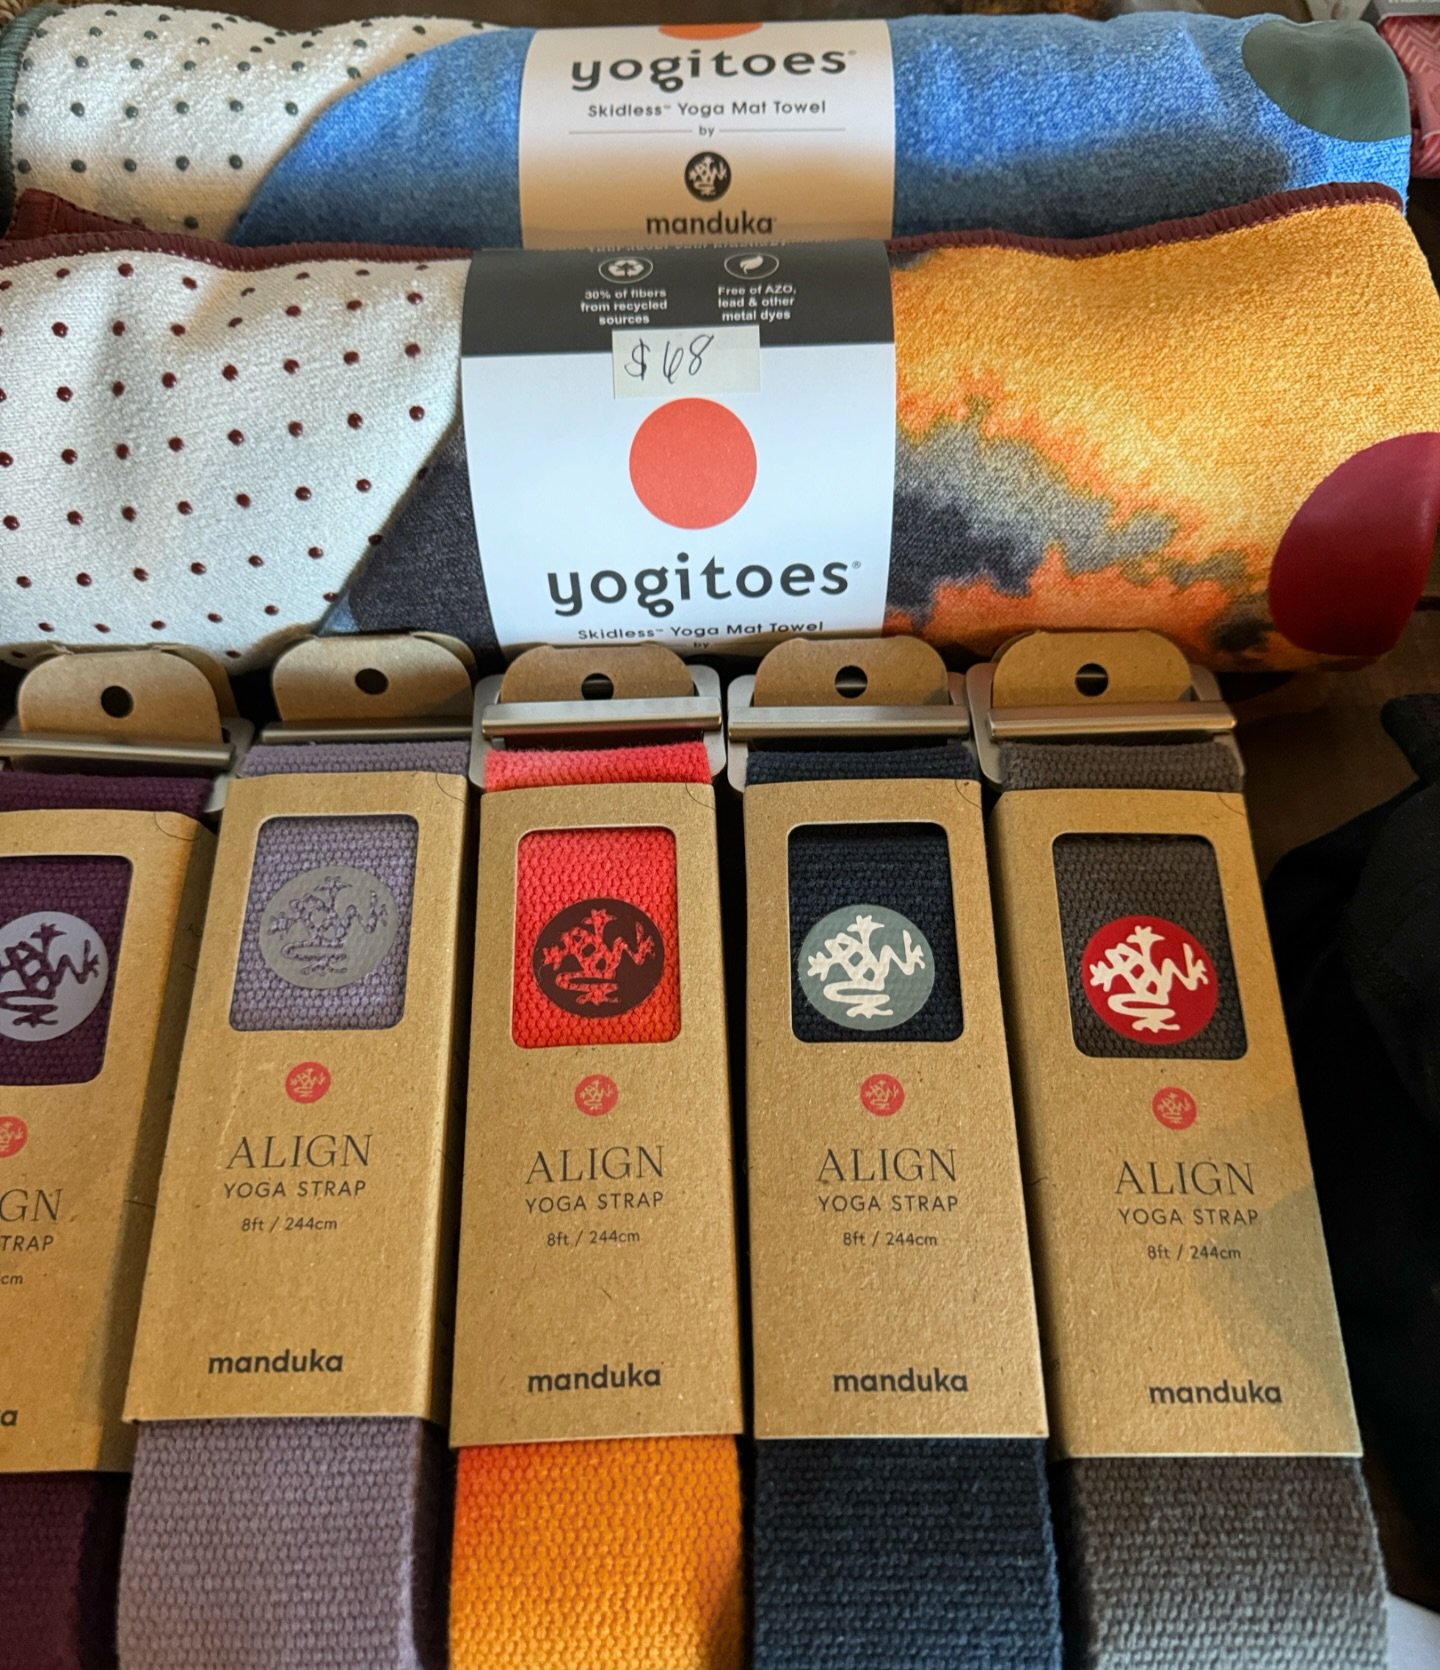 NEW 🌼🌈🦋 Manduka Yogitoes towels &amp; straps!!

Yogitoes cover the entire length &amp; width of a Manduka PRO mat. They offer superior grip for a zero-slip ride. Each ultra-absorbent towel is constructed of recycled plastic bottles. The designs ar